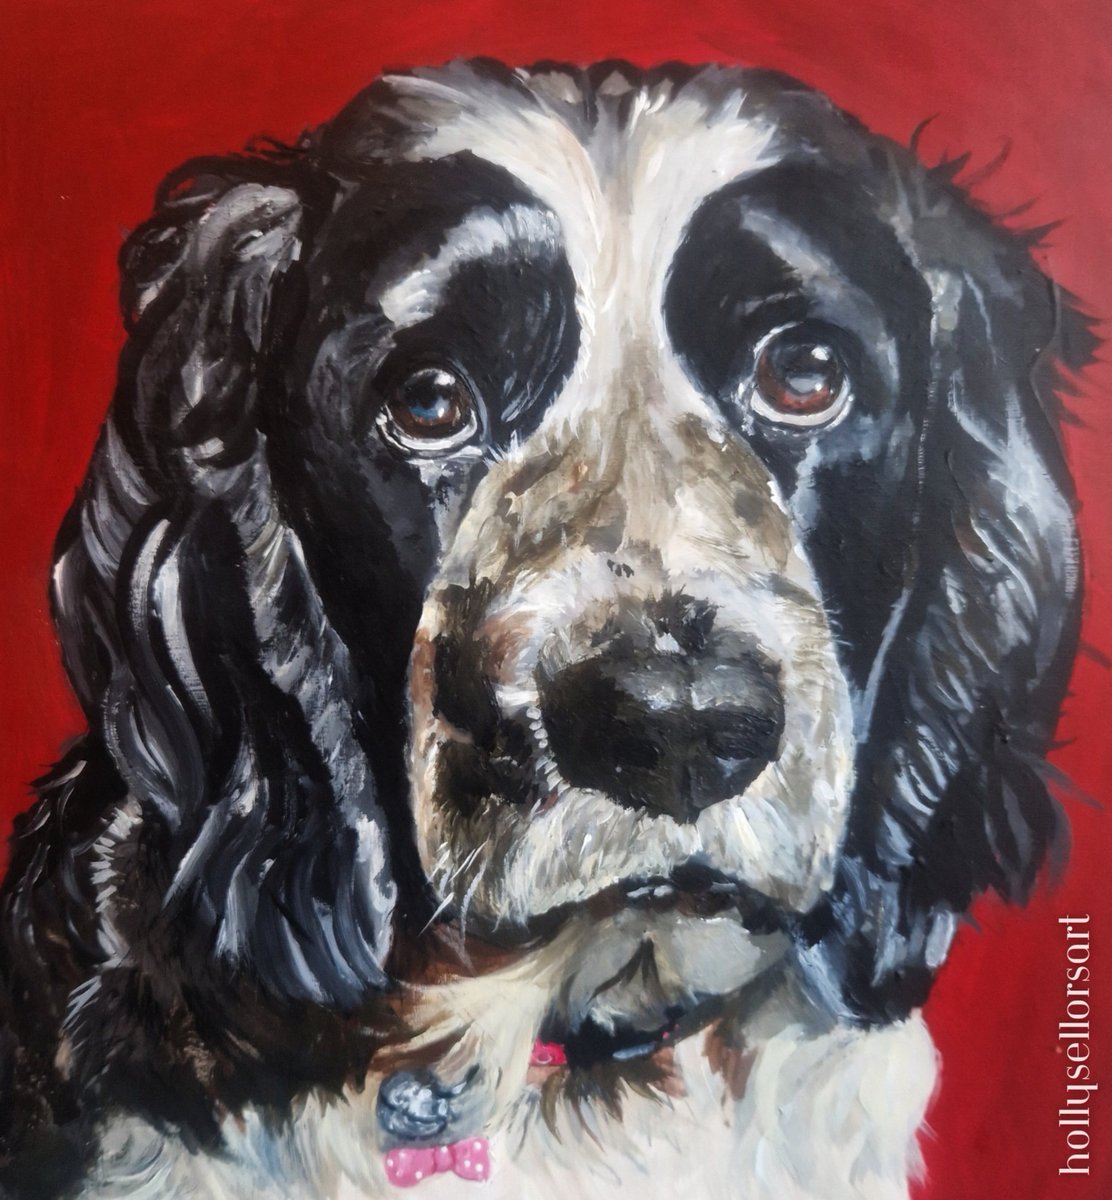 In memory and celebration of Poppy 🌈❤️ for @TaylorShone ❤️🌈 I hope I managed to capture her well 🥰

What do you all think? I love the red 😍 

❤️ a RT 🙏😽 

#christmasgift #springerspaniel #acrylicpainting #petportraitartist #petportrait #dogmemorial #dogsoftwitter